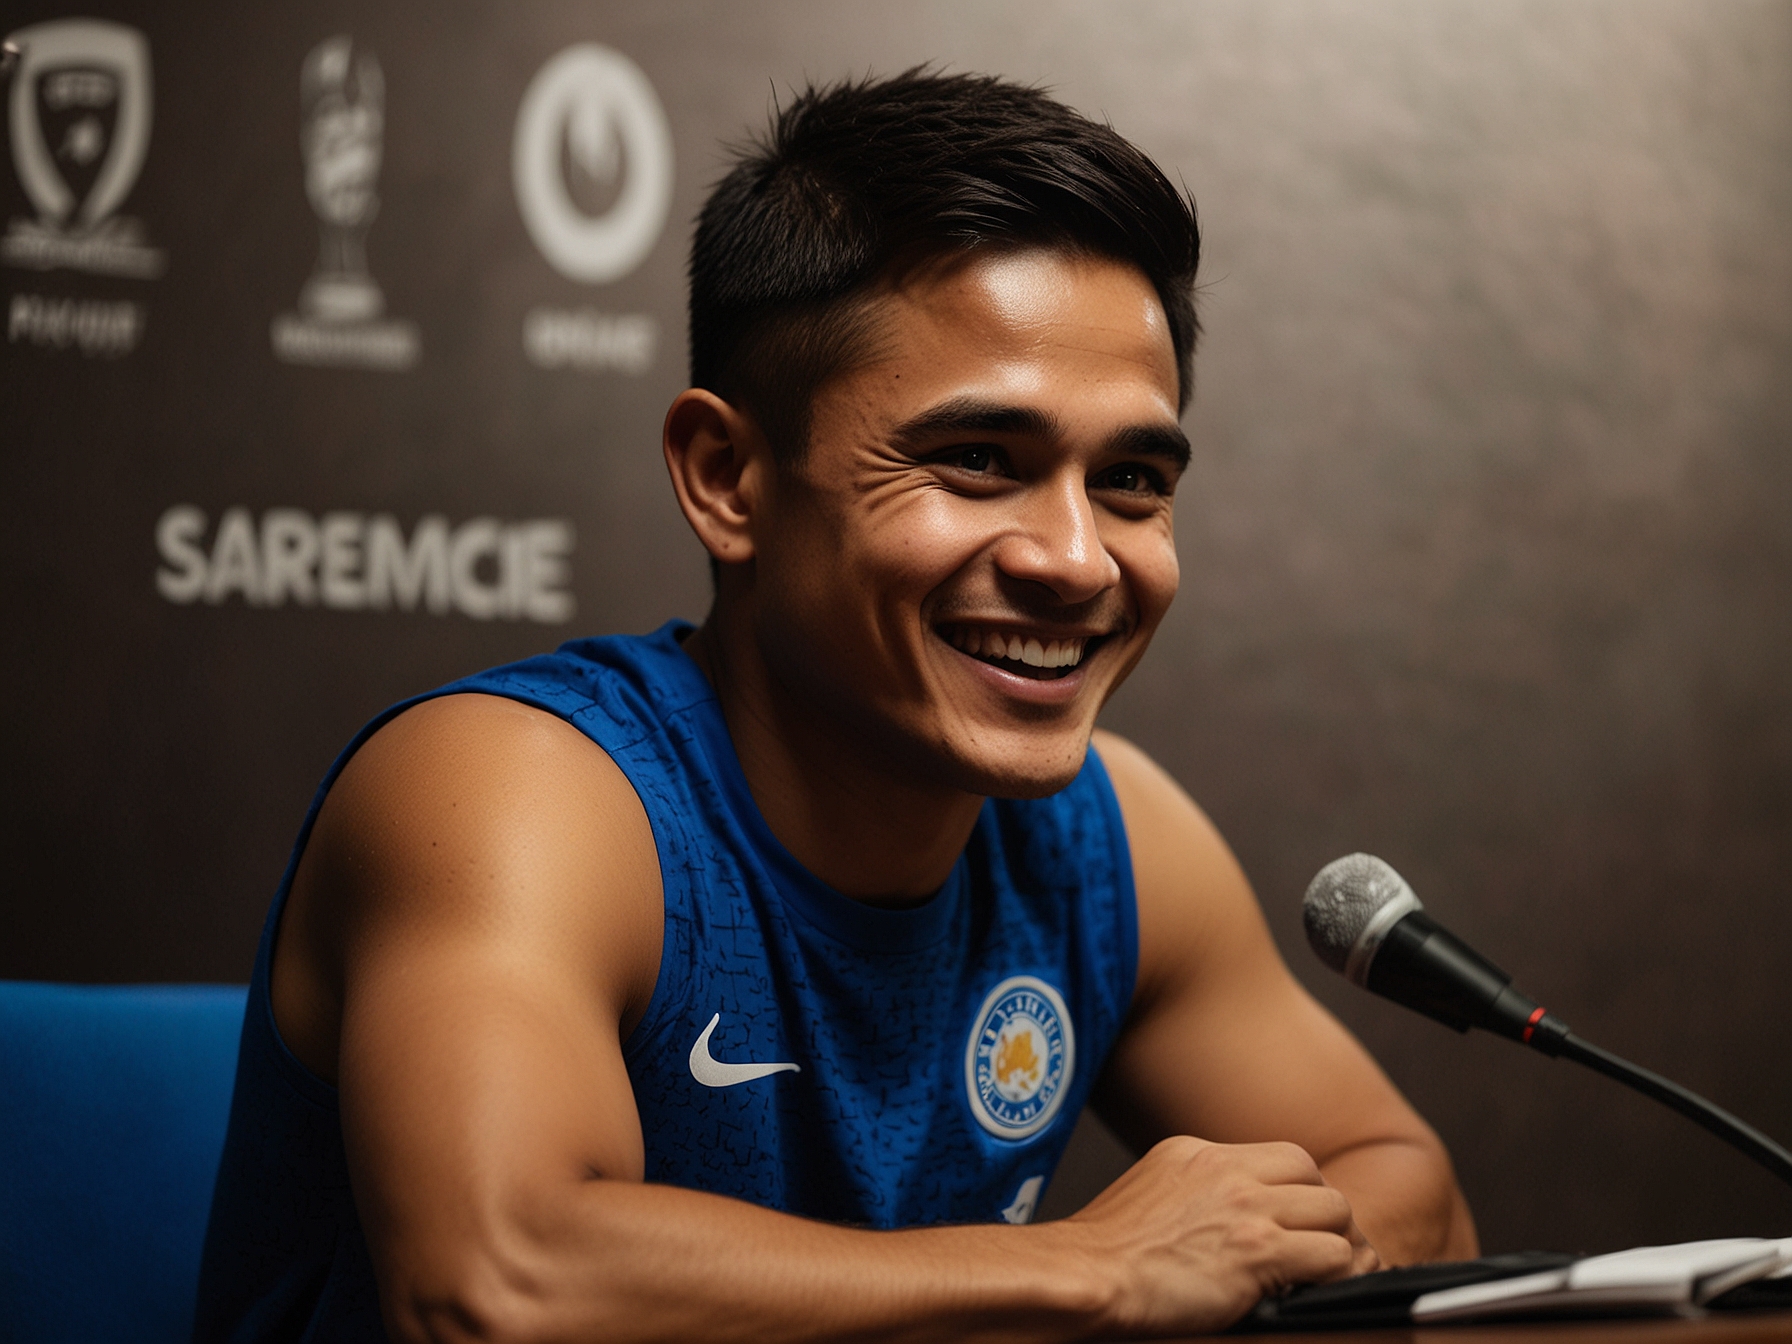 A candid shot of Sunil Chhetri smiling during a press conference, engaging with both the media and fans effortlessly.